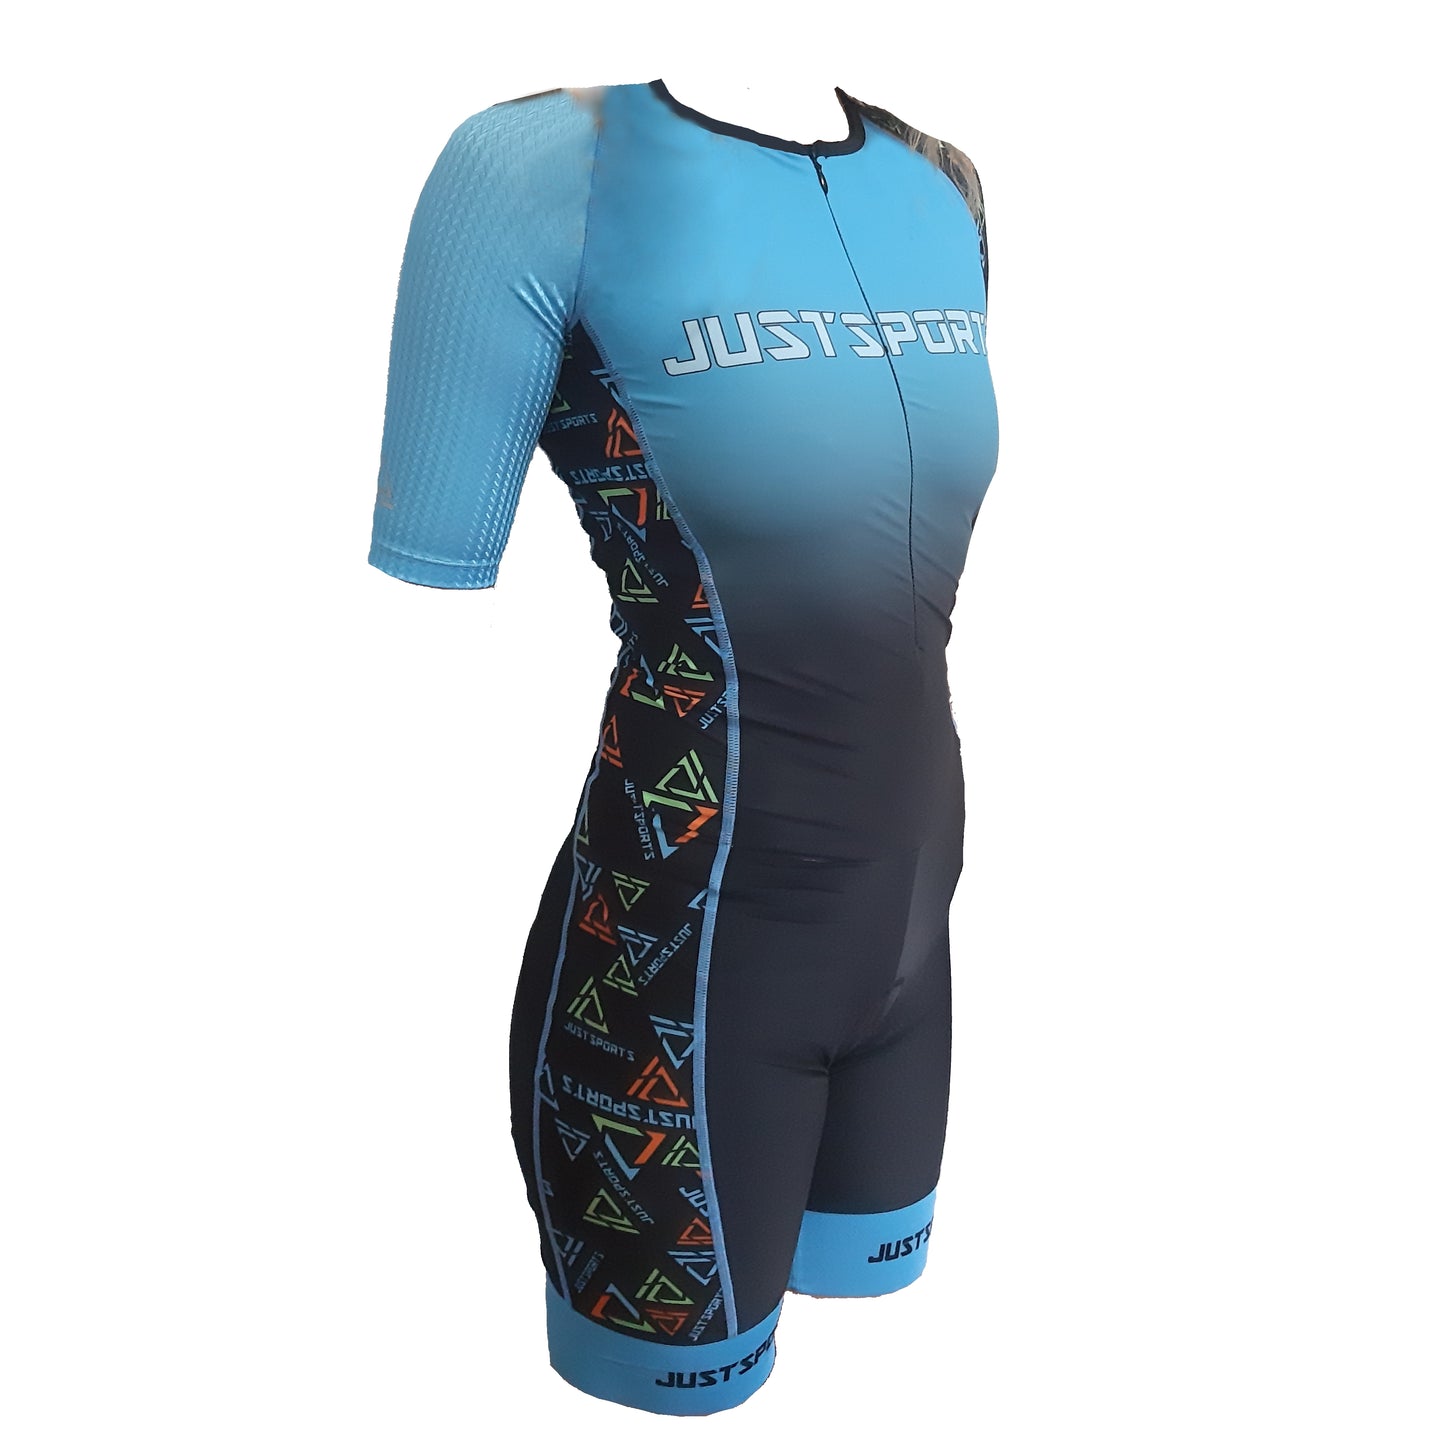 Justsports Tri suit with Sleeves